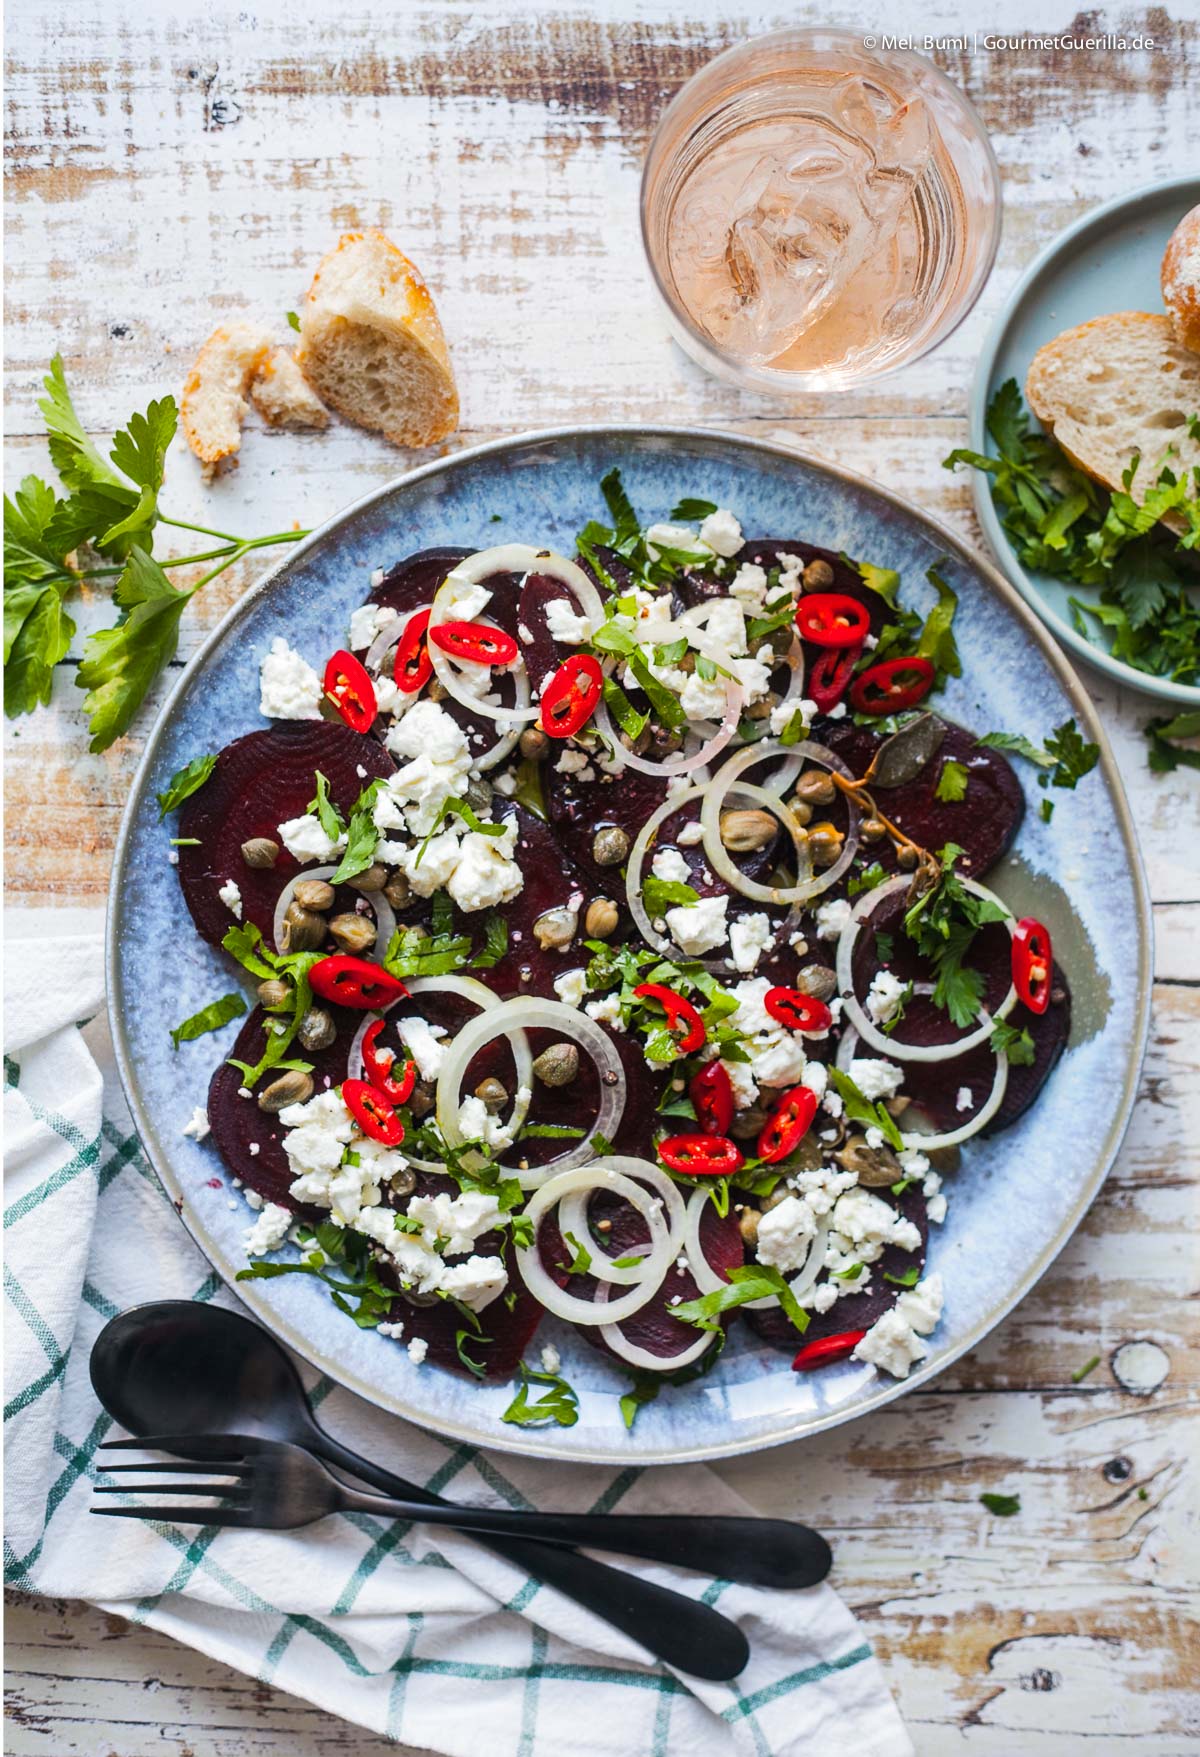 beetroot salad with capers and feta - in 5 minutes on the GourmetGuerilla.com 